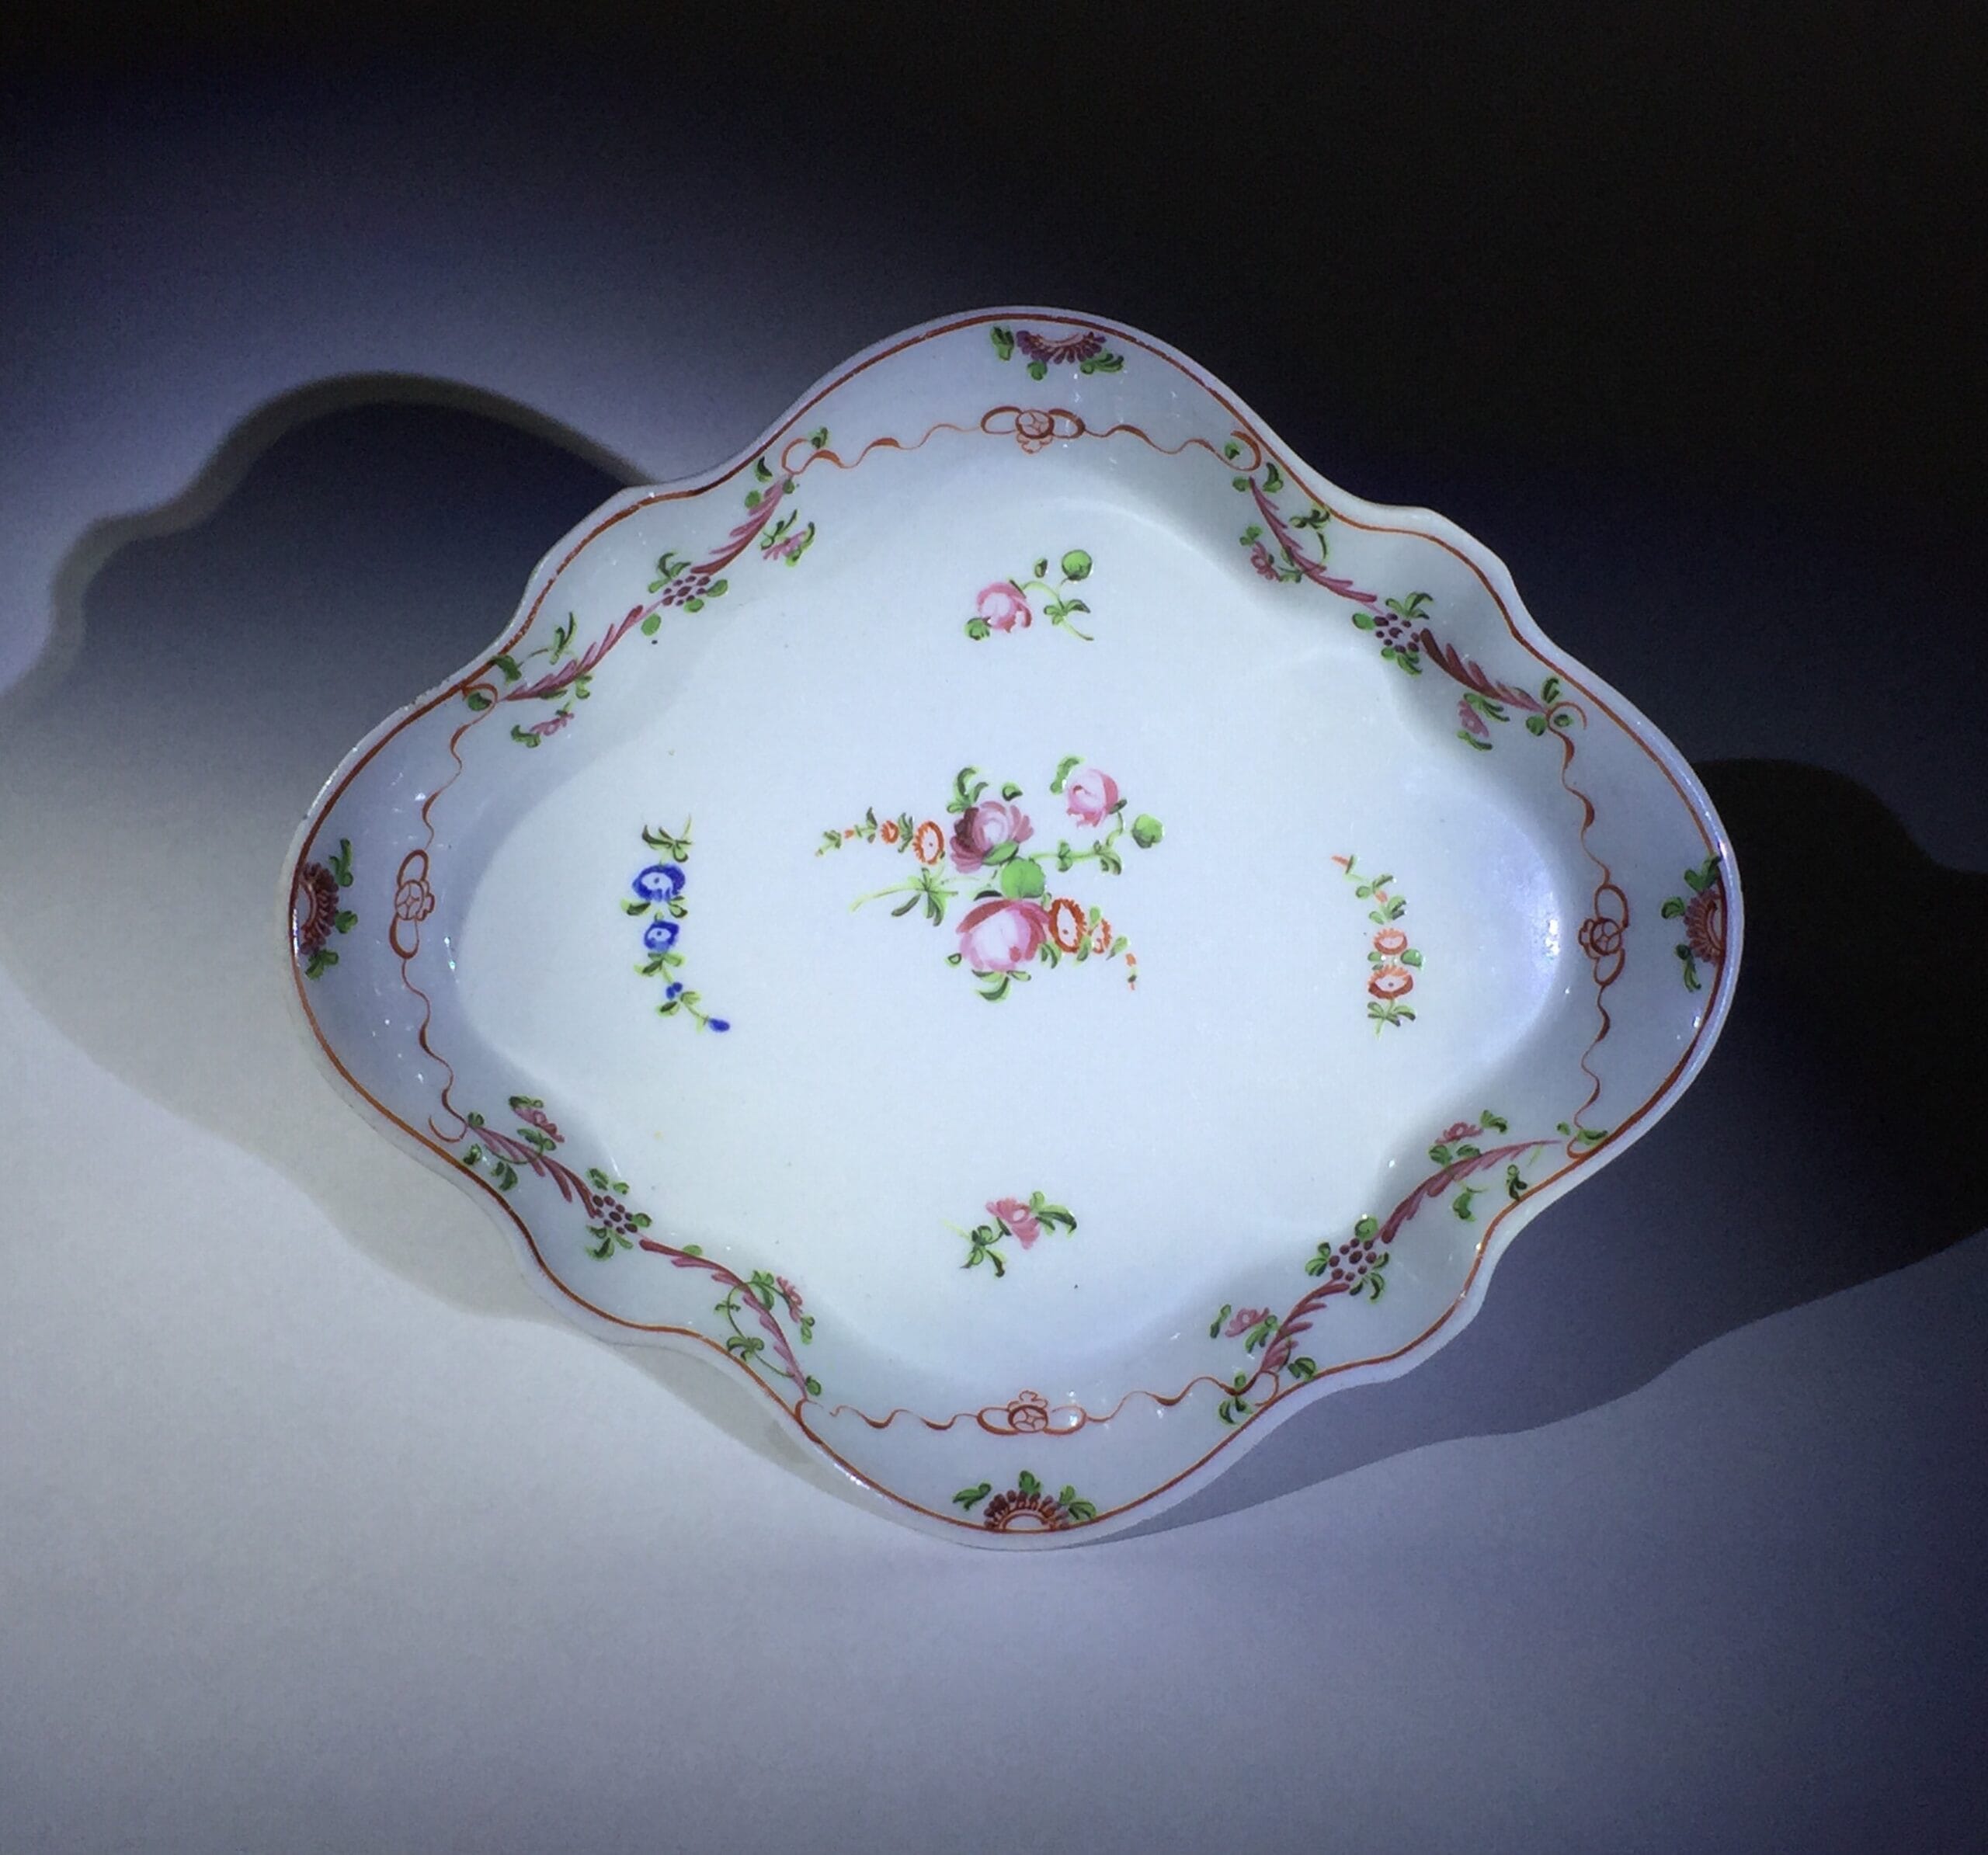 Newhall teapot stand, pattern 195, c. 1795 -0